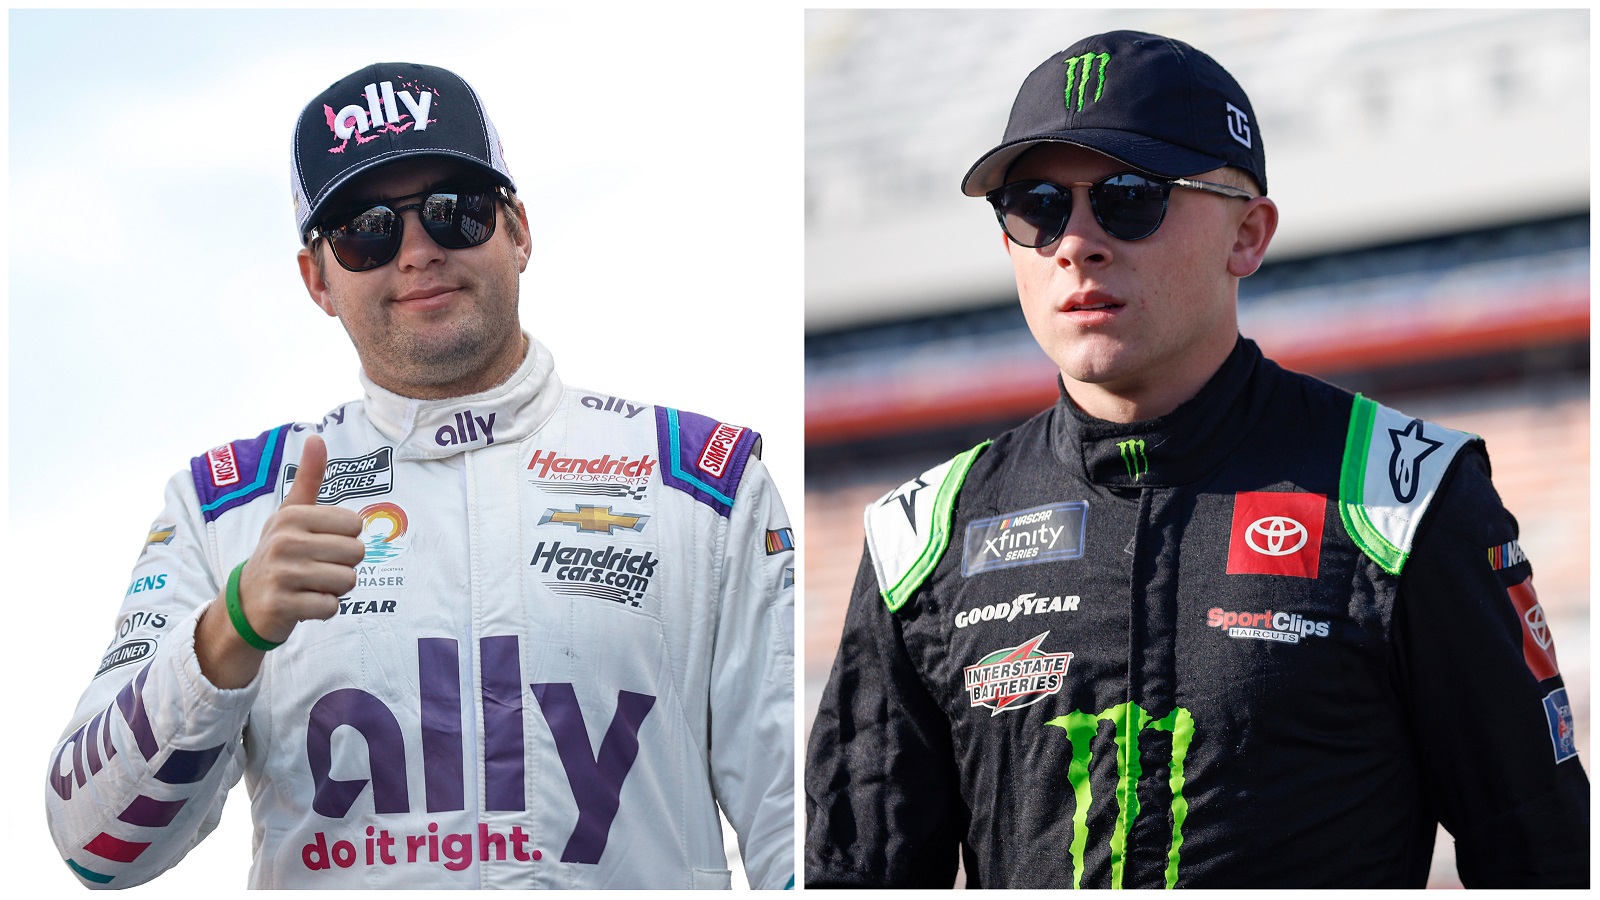 NASCAR Cup Series drivers Noah Gragson of Petty GMS and Ty Gibbs of Joe Gibbs Racing. | Getty Images